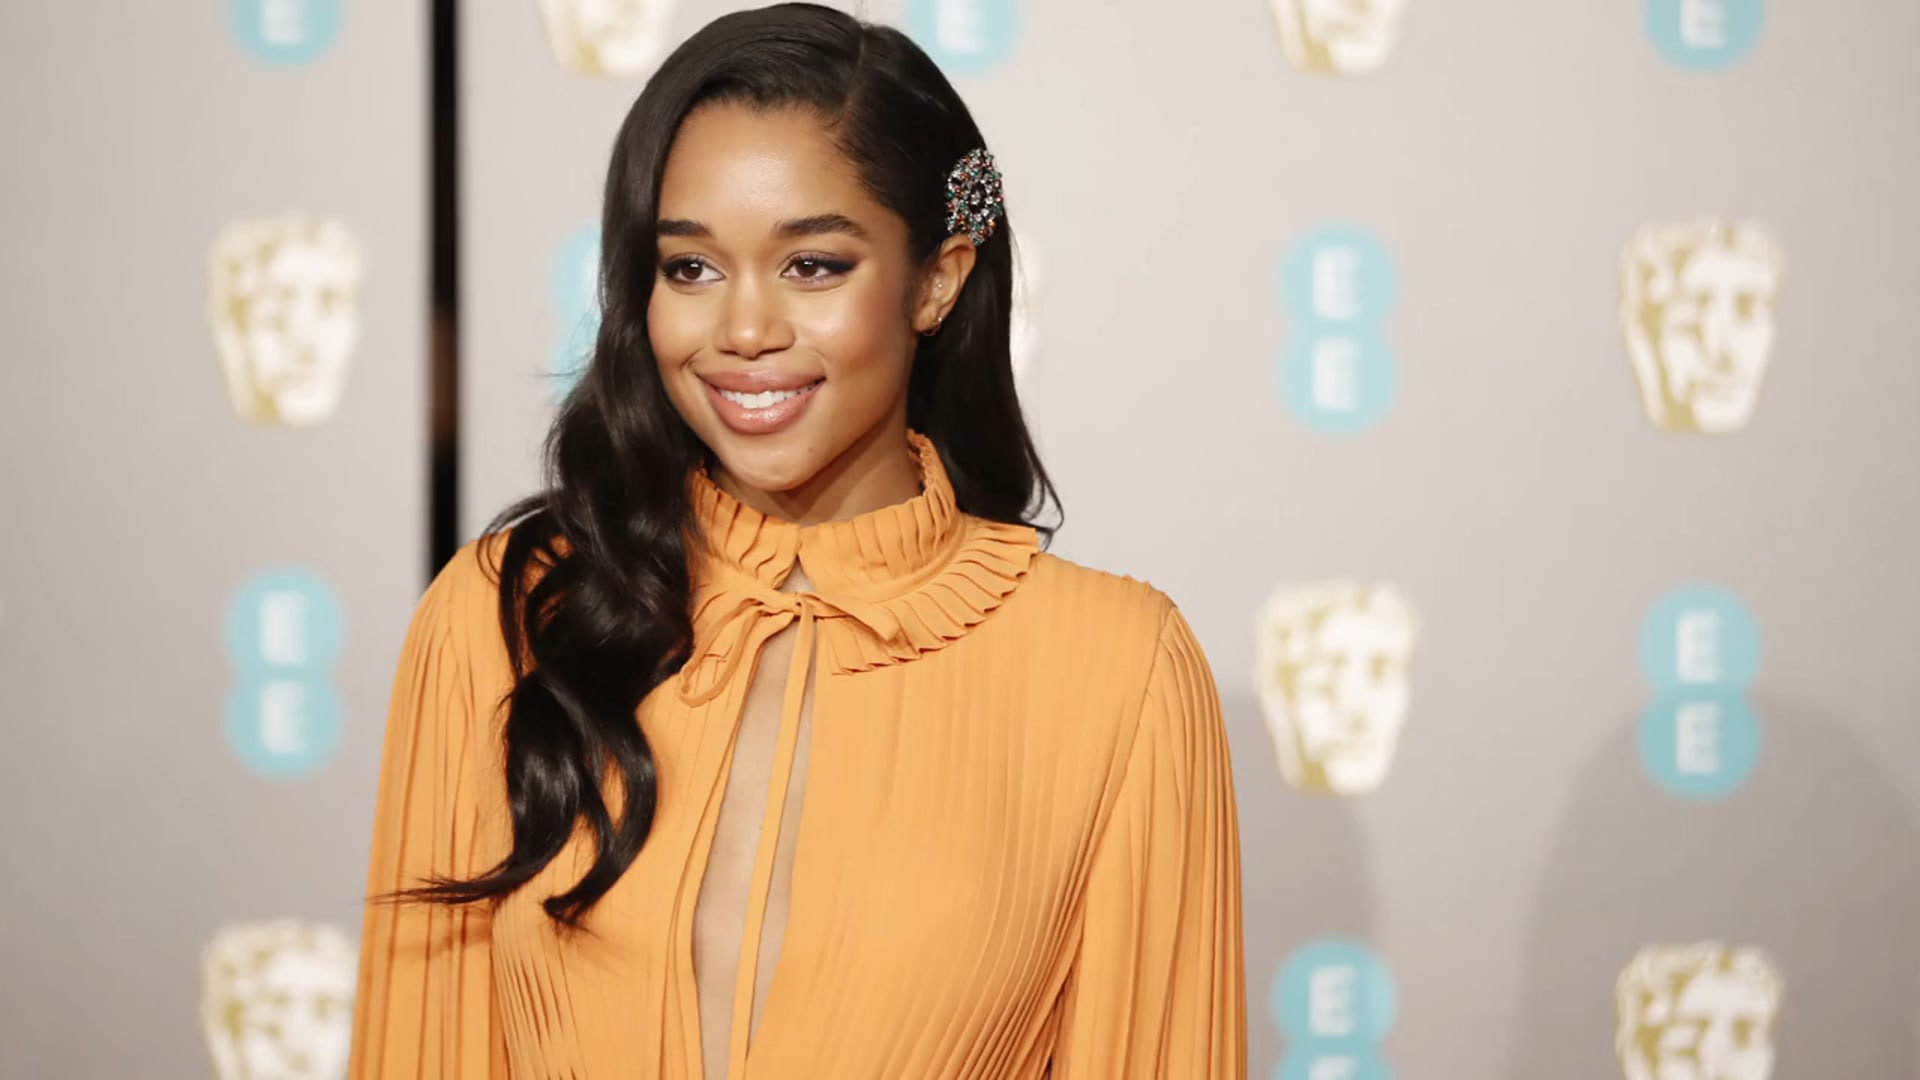 38 Facts about Laura Harrier - Facts.net